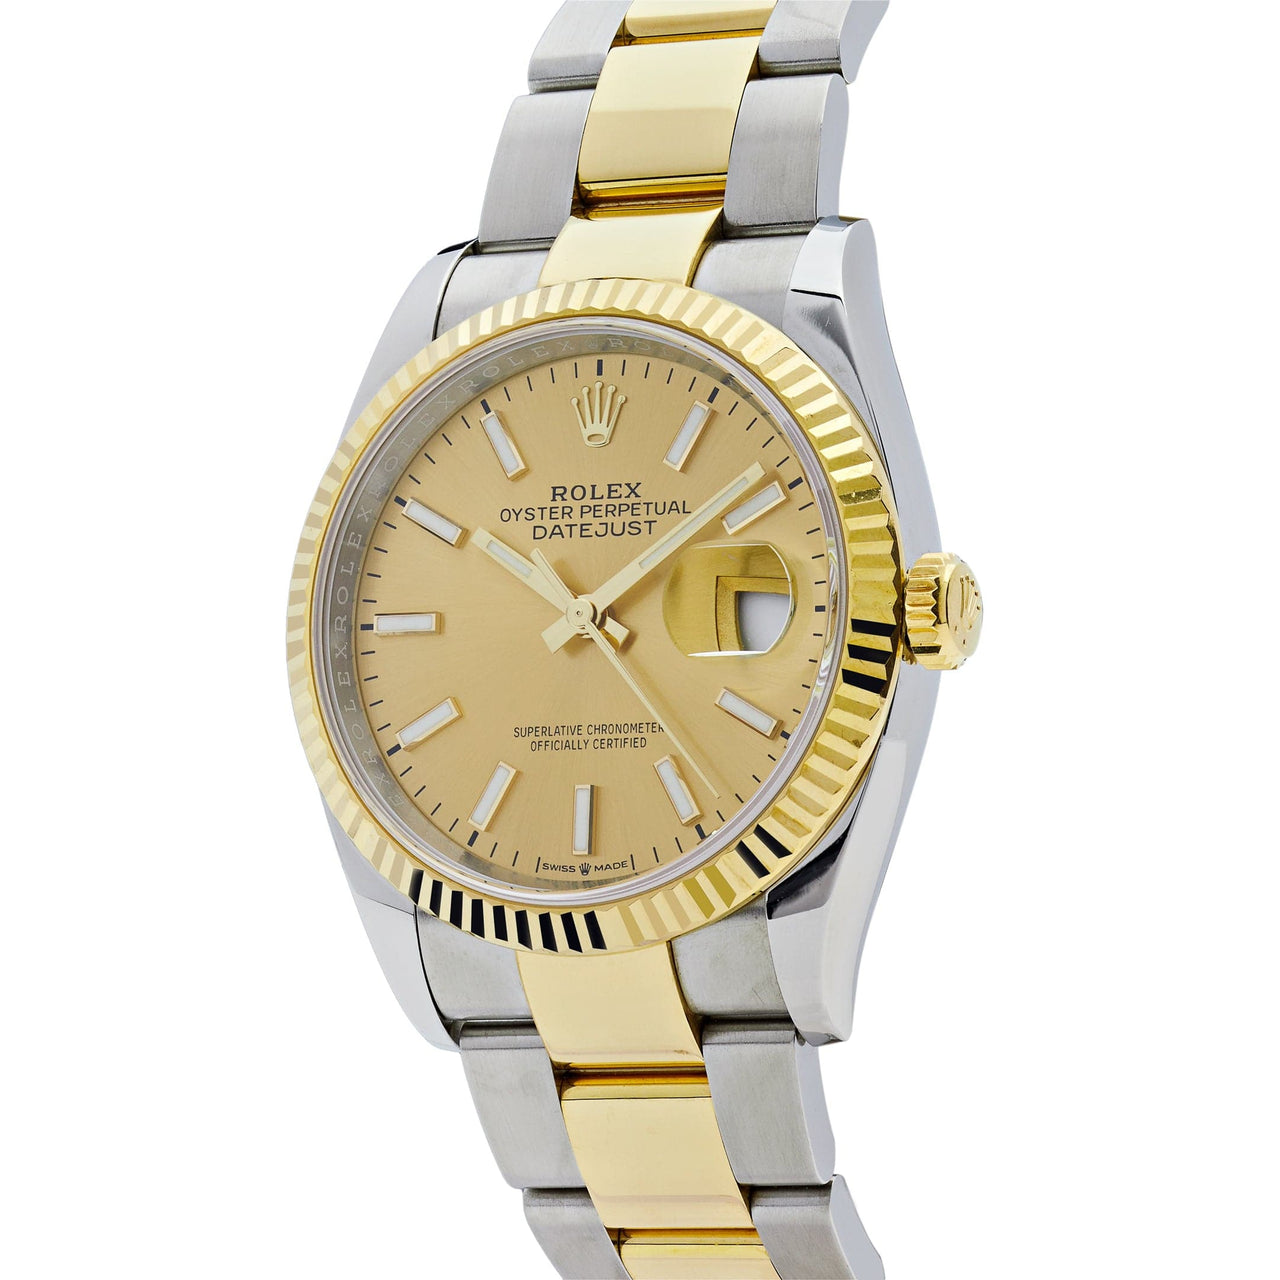 Rolex Datejust 36 Yellow Gold & Stainless Steel Champagne Dial 126233 Wrist Aficionado